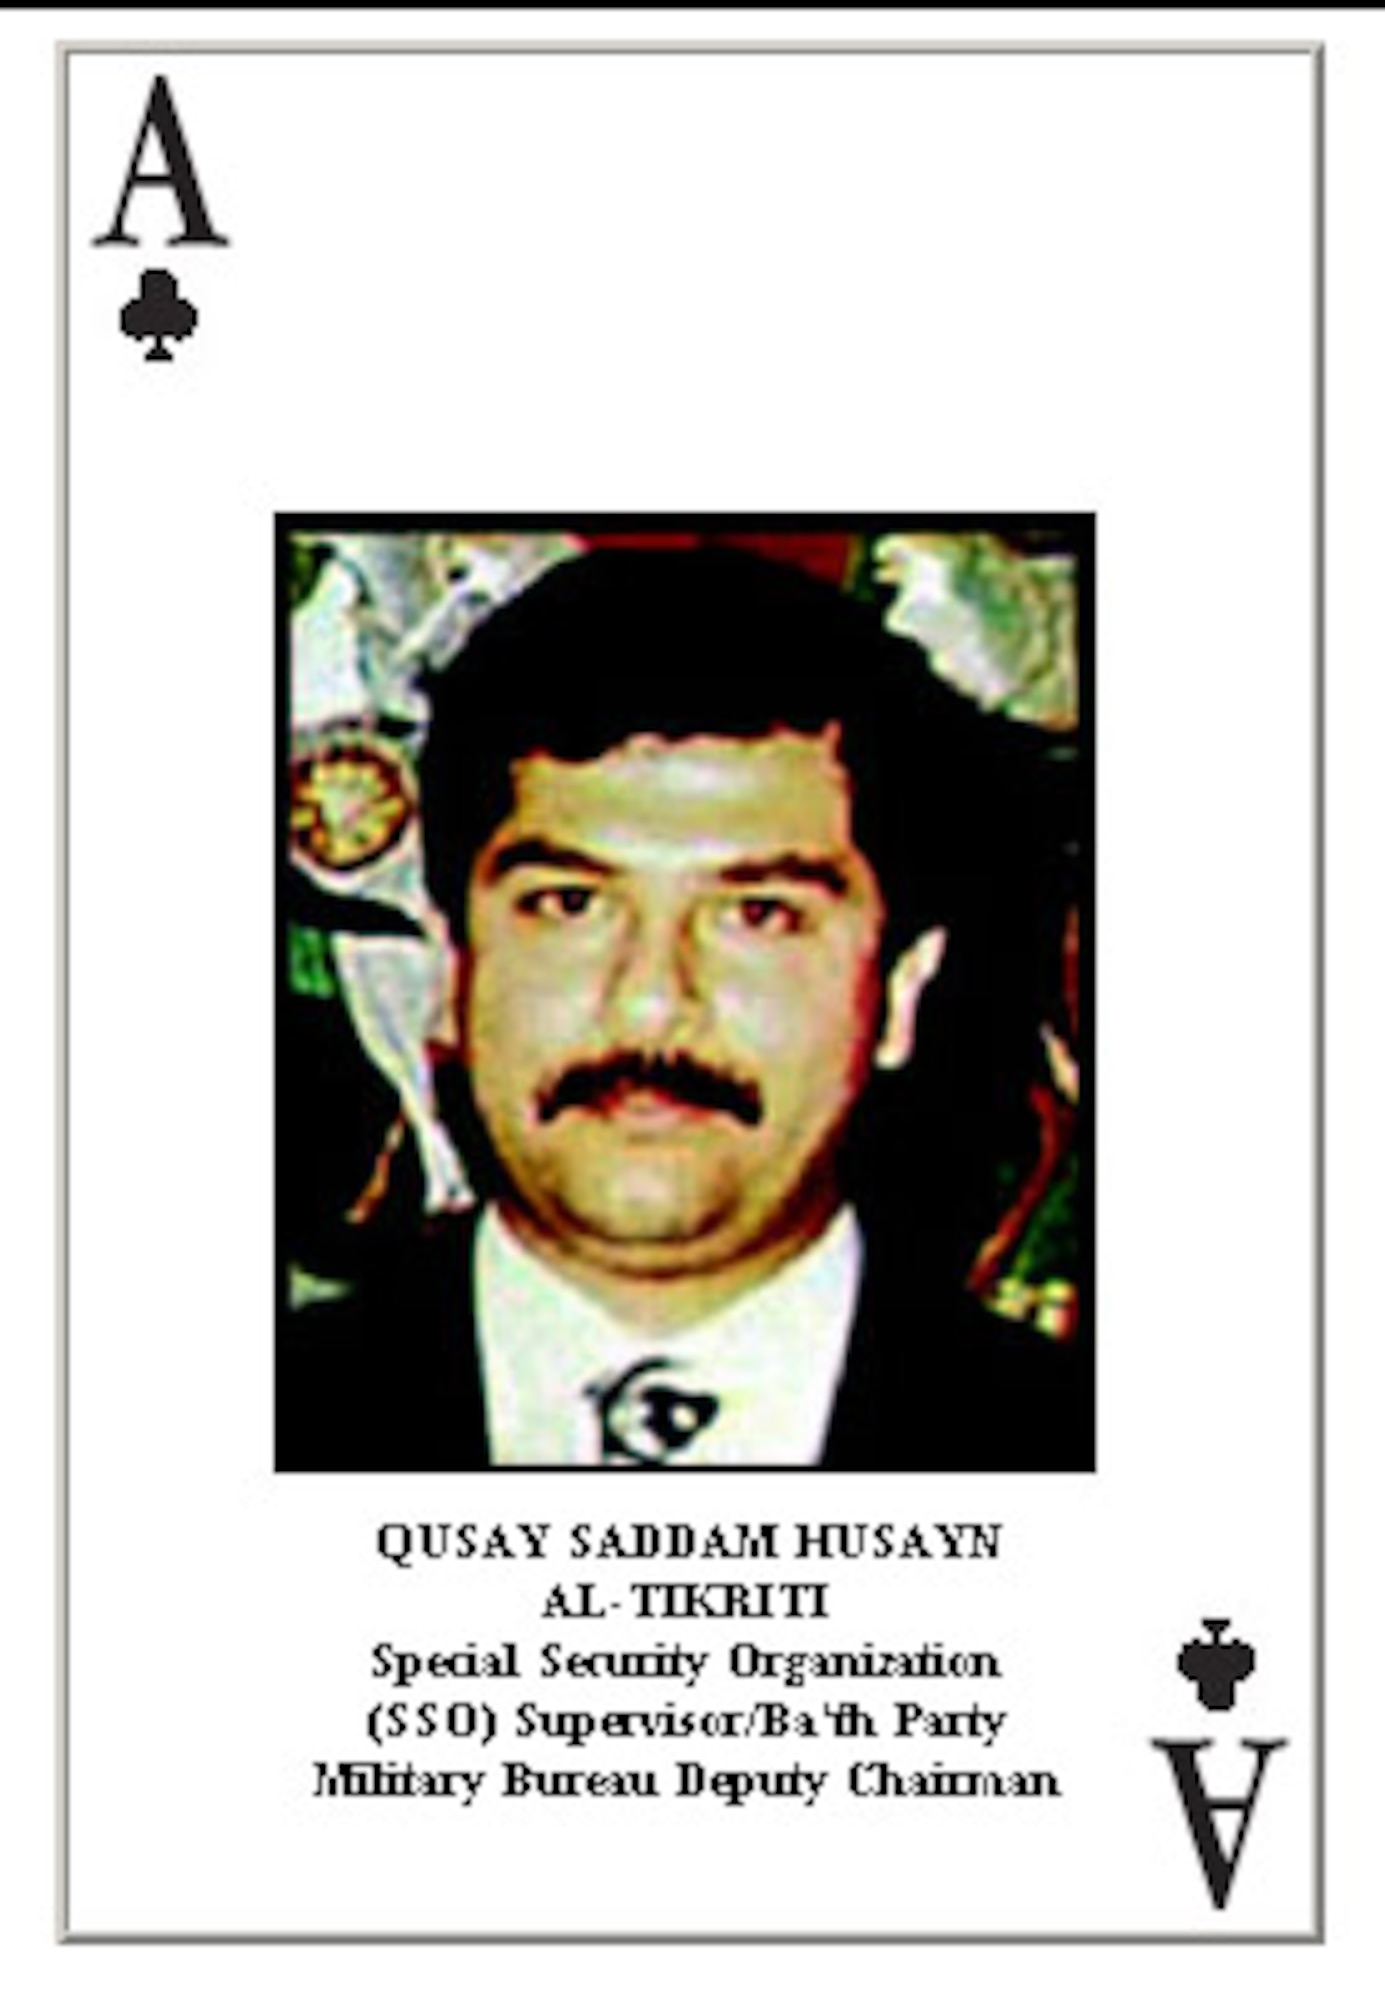 OPERATION IRAQI FREEDOM -- U.S. Central Command issued their most wanted deck of cards Friday which gvies U.S. Operation Iraqi Freedom troops an easy reference list for top Iraqi officials.